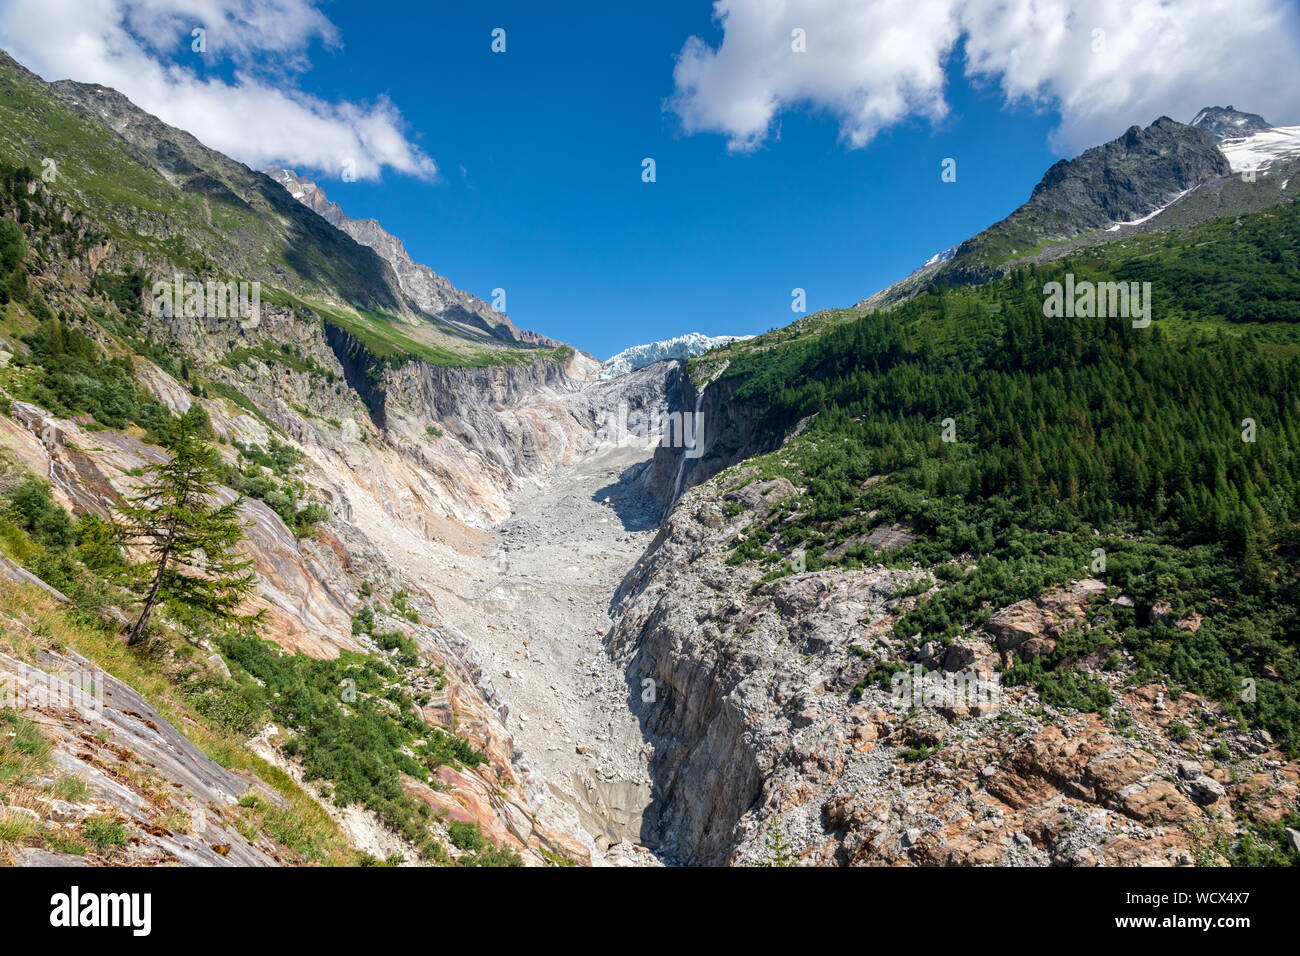 Argentiere glacier from the viewpoint at Pierre a bossons in Argentiere.  The glacier has retreated in the rocky moraine field. Stock Photo